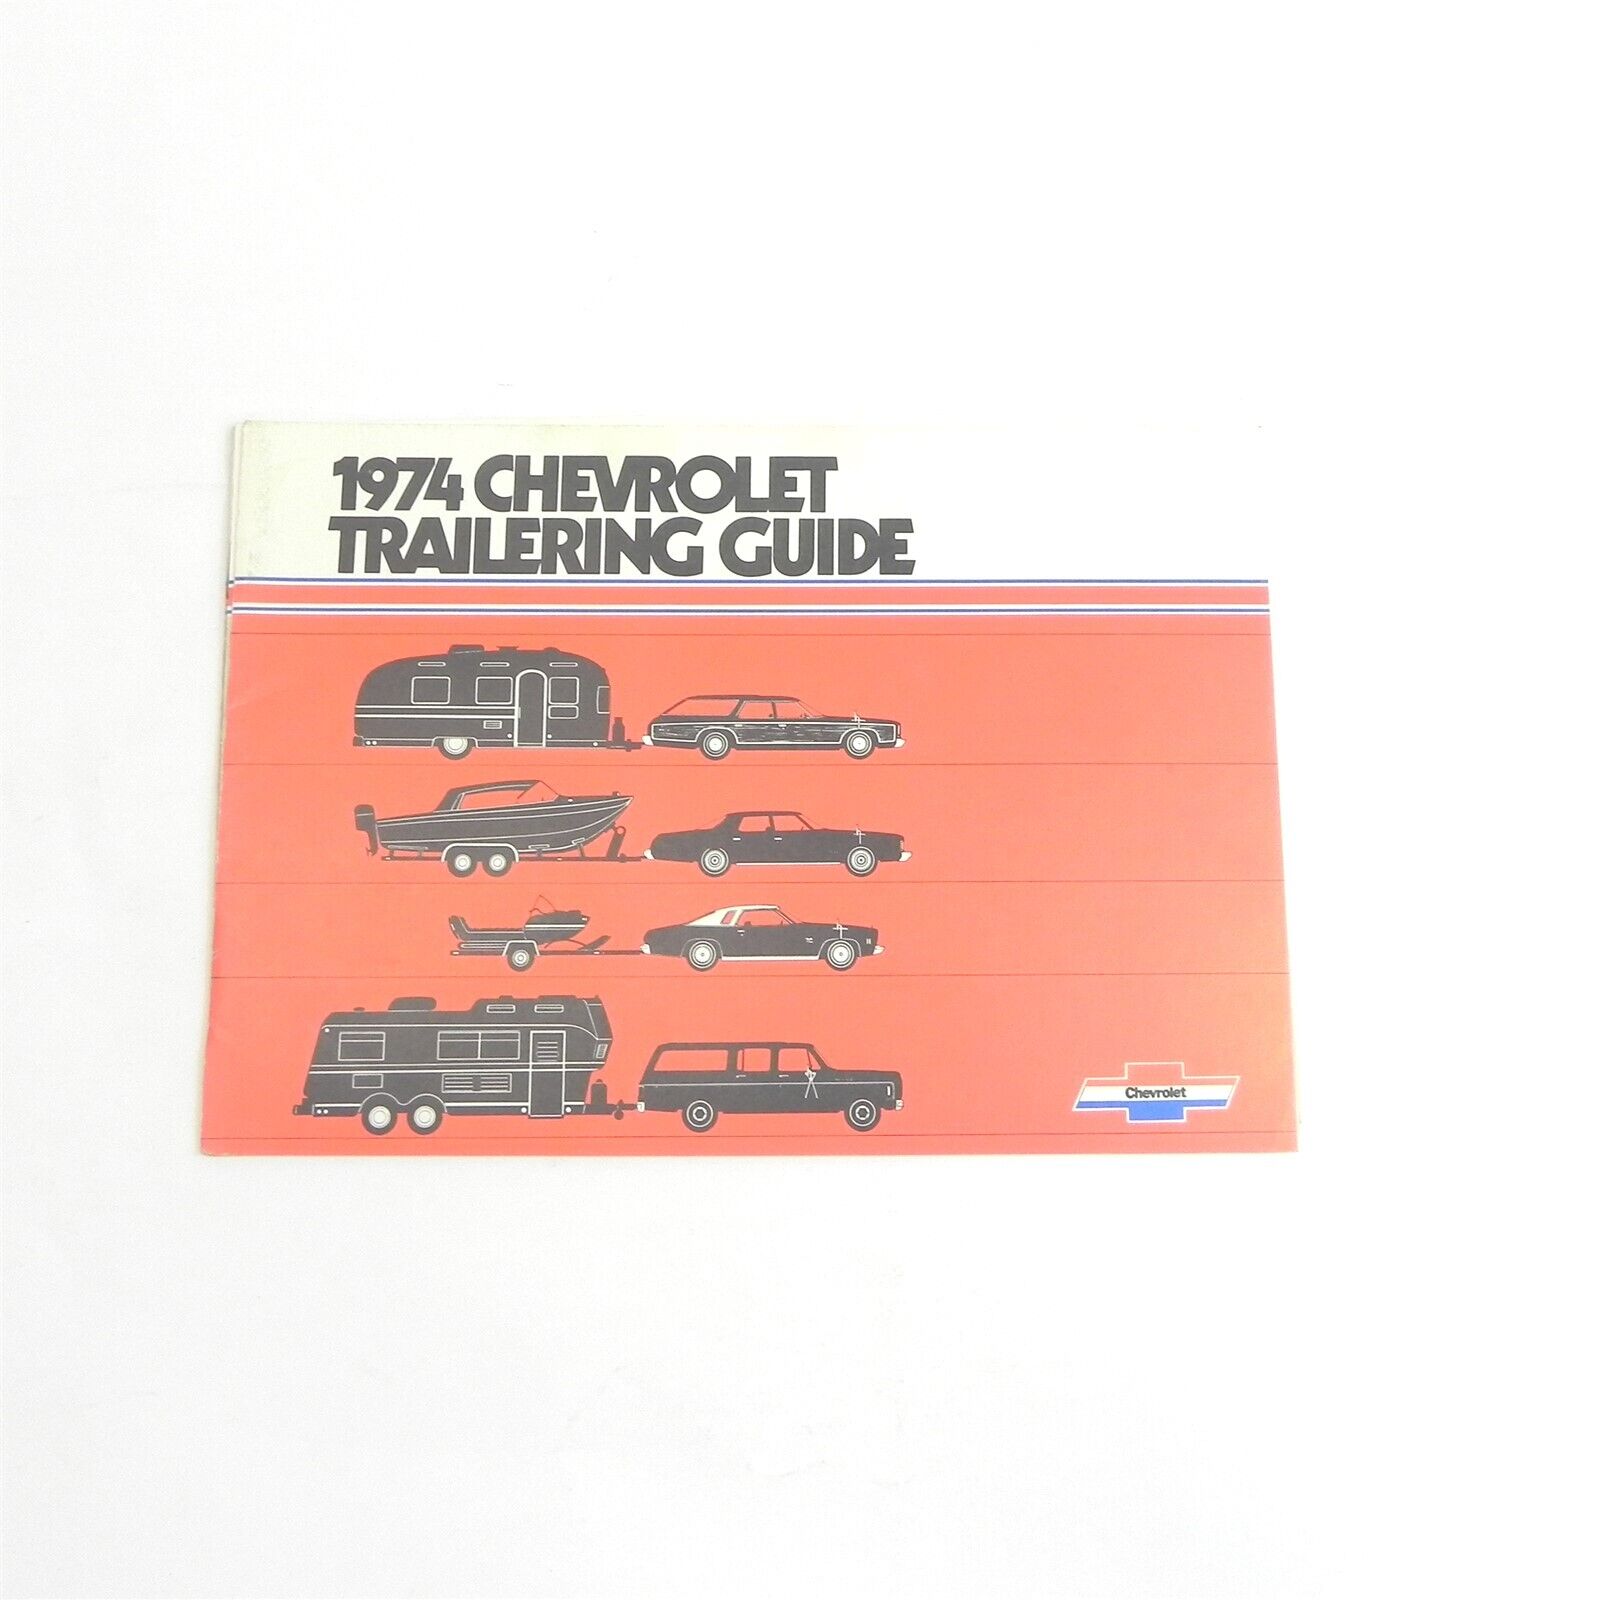 1974 CHEVROLET CHEVY TRAILERING GUIDE DEALERSHIP SALES BROCHURE SPECIFICATIONS